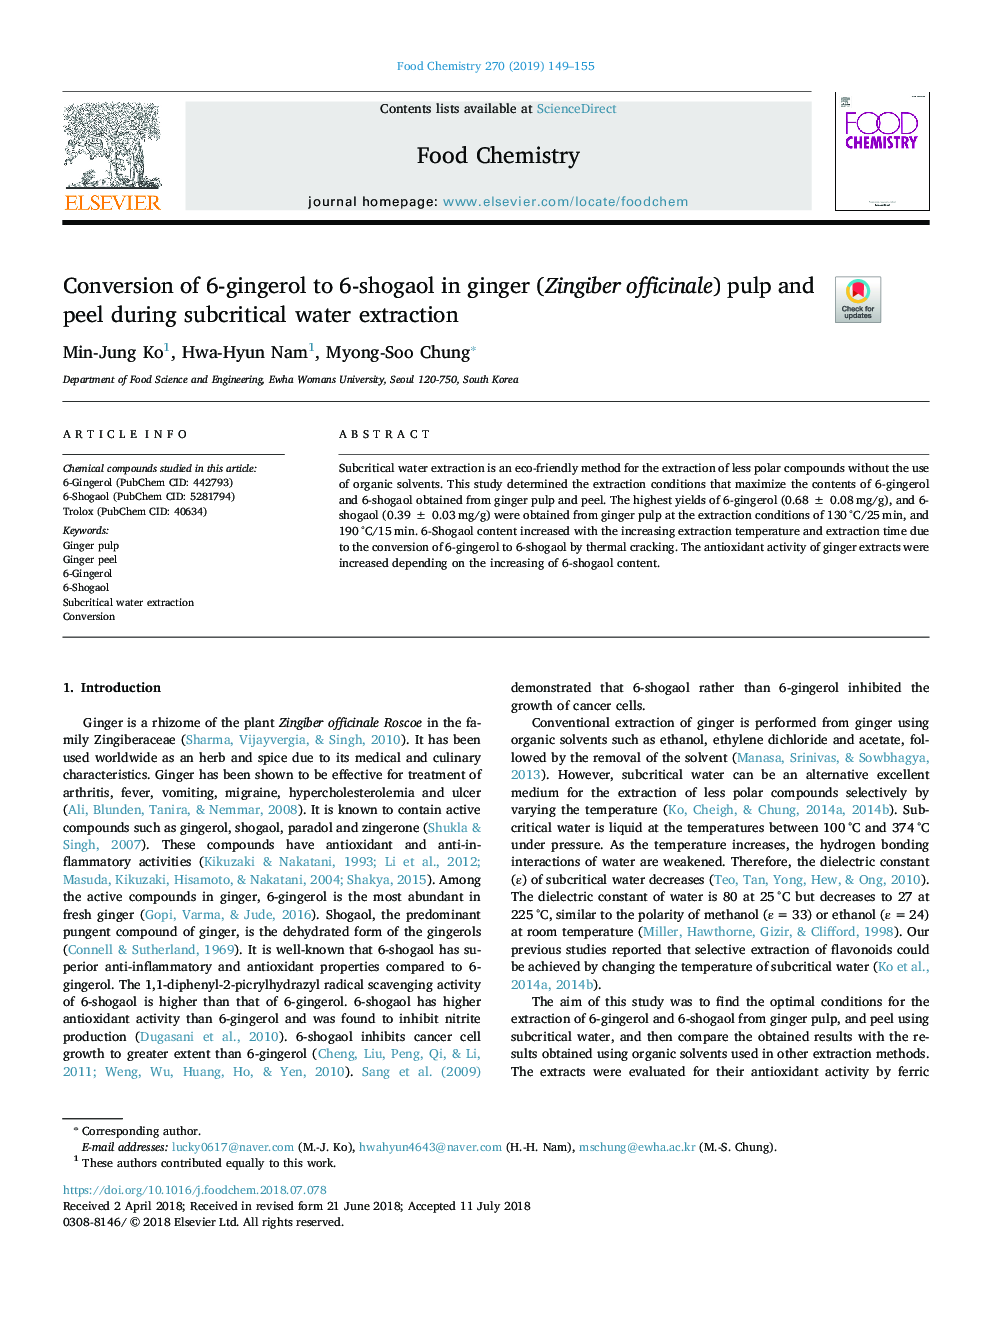 Conversion of 6-gingerol to 6-shogaol in ginger (Zingiber officinale) pulp and peel during subcritical water extraction